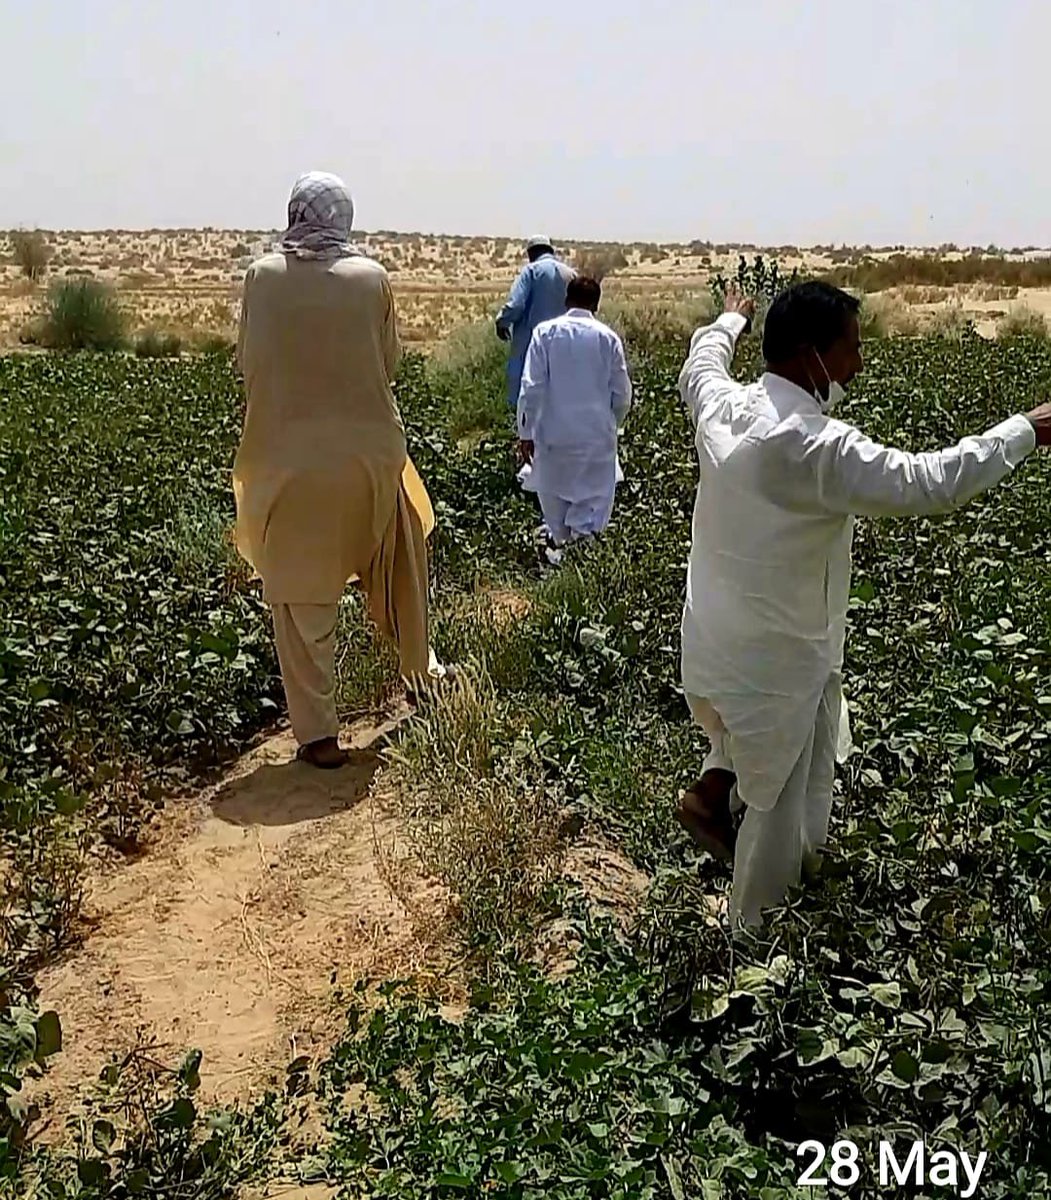 #AgricultureExtension is the #front-line worker for national emergency on #locust. Yesterday Mr Shahid Ali Memon - working at district #Khairpur lost his life while saving farmer livelihoods….. 😪😪 We request the government to ensure #safety first for all #frontline workers